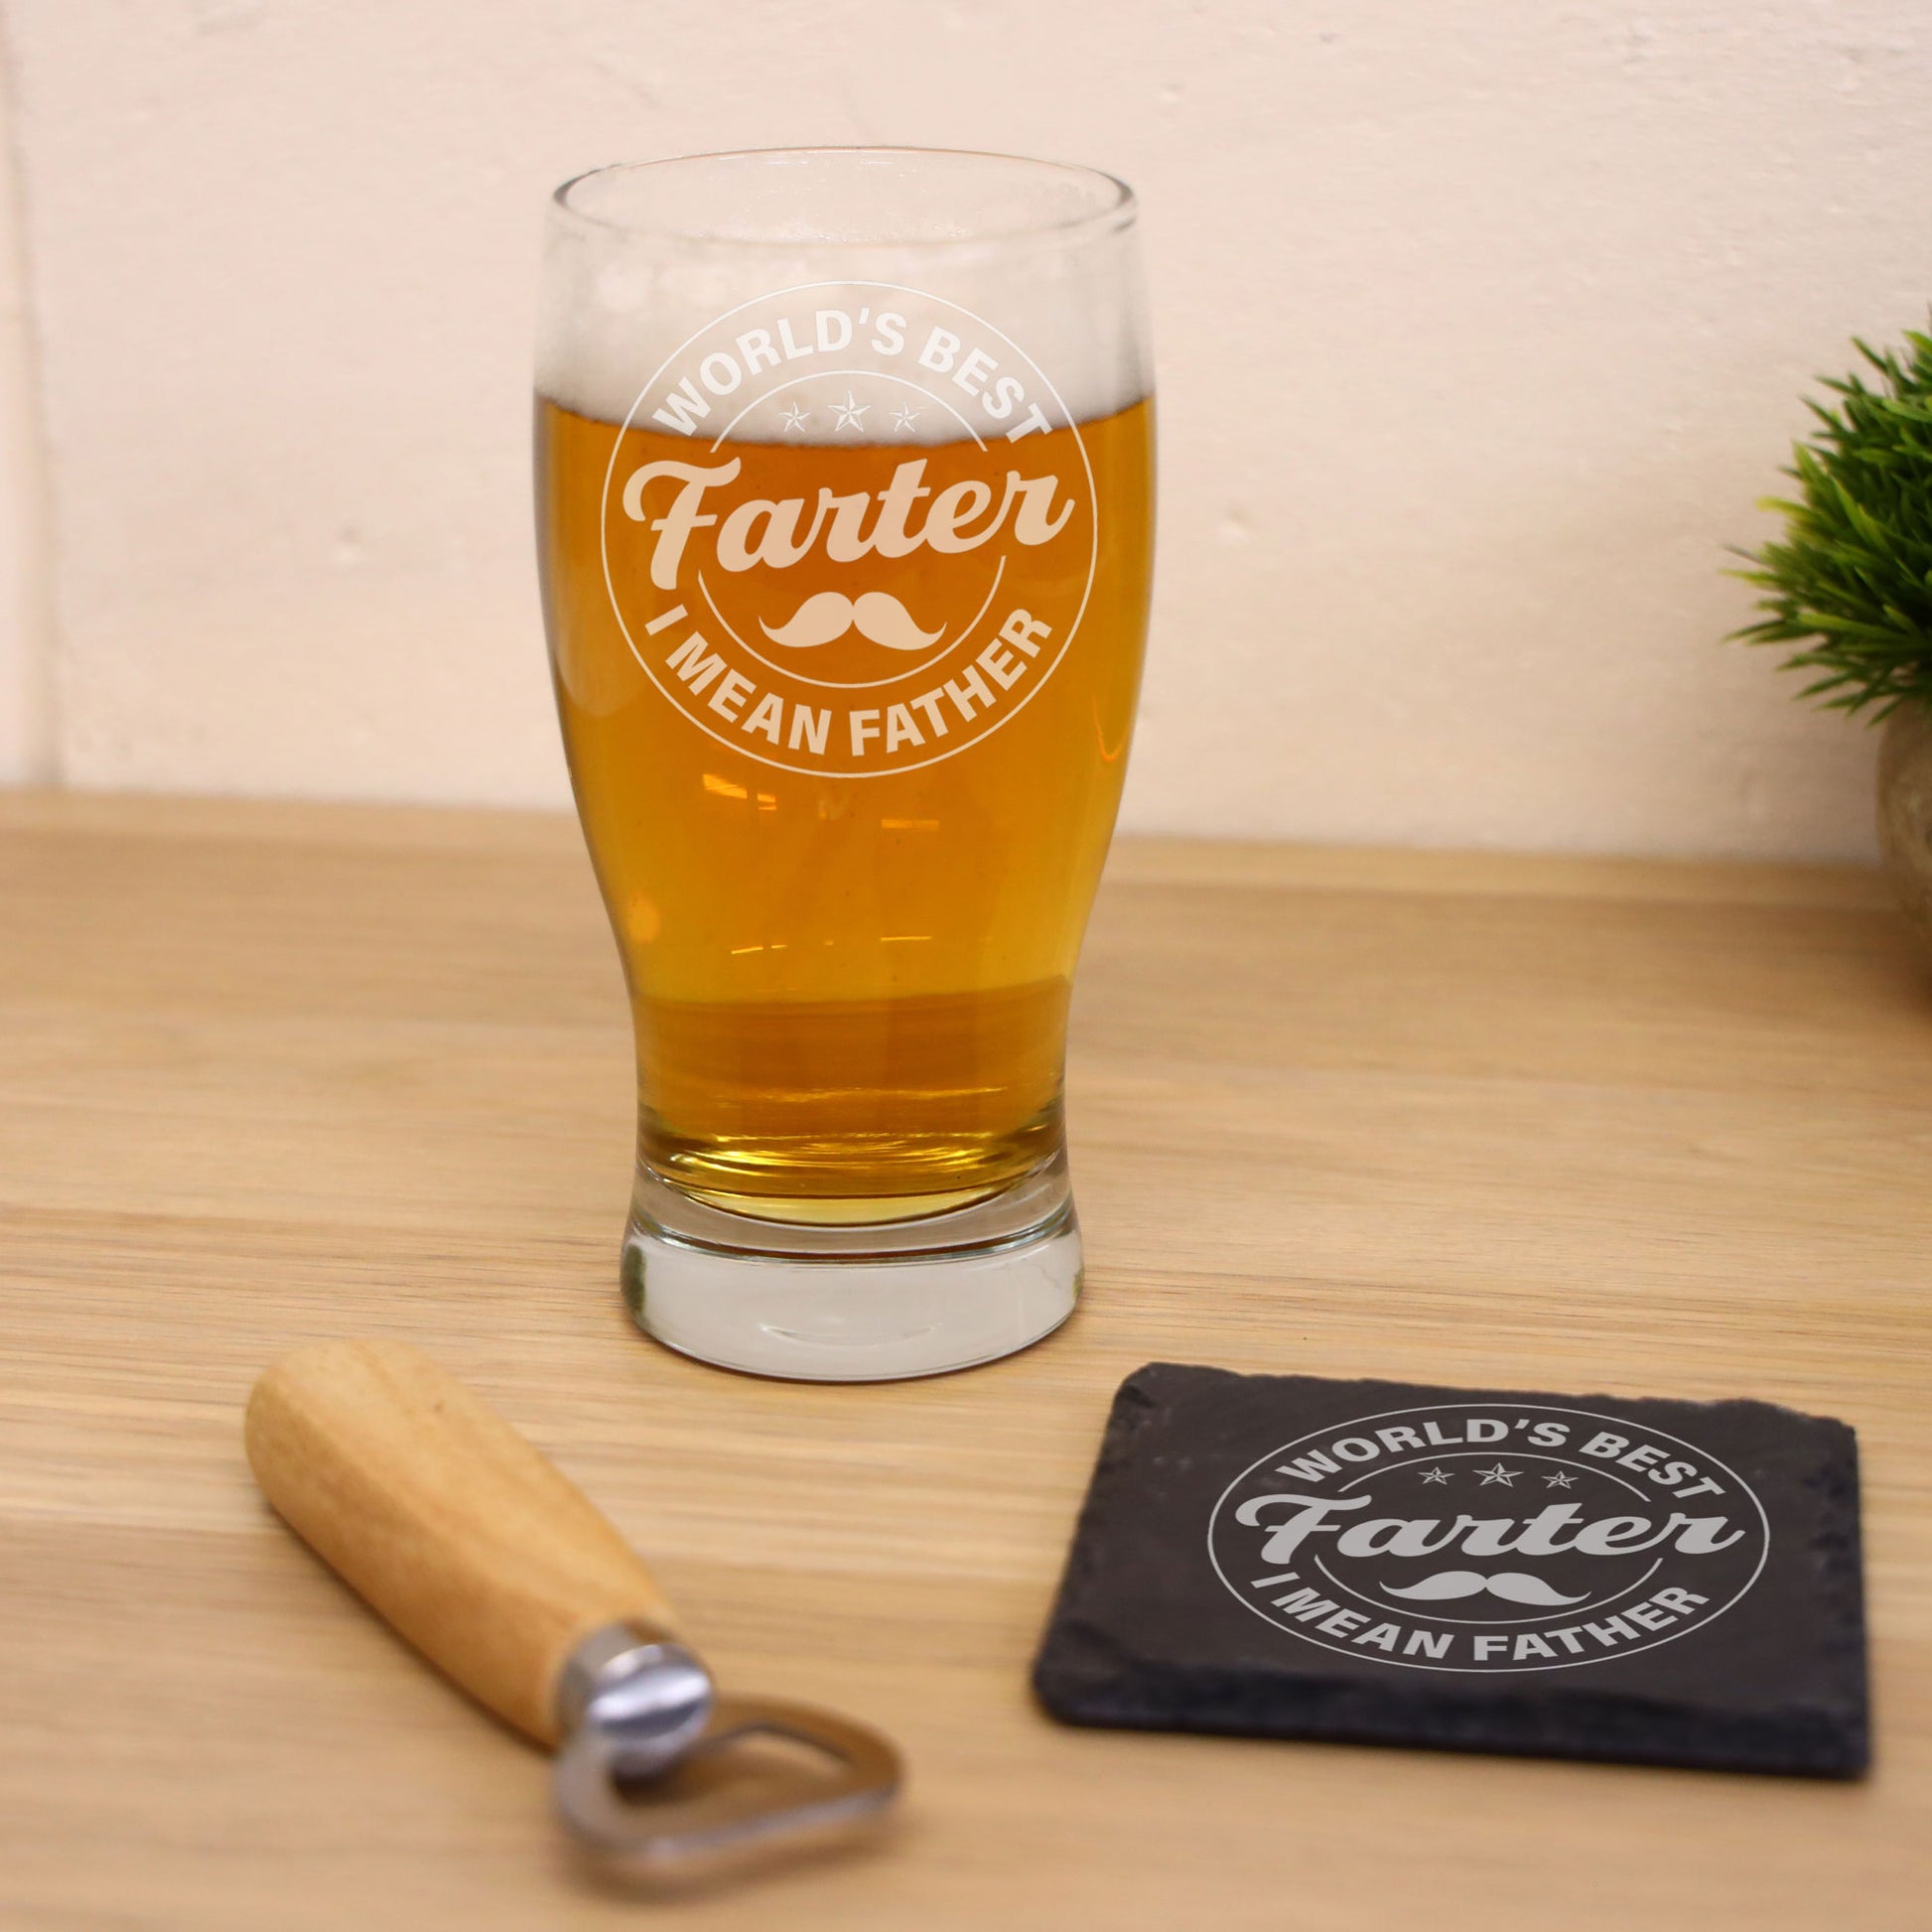 Worlds Best Farter I Mean Father Engraved Beer Glass and/or Coaster Set  - Always Looking Good - Circle Style Glass & Square Coaster Set  